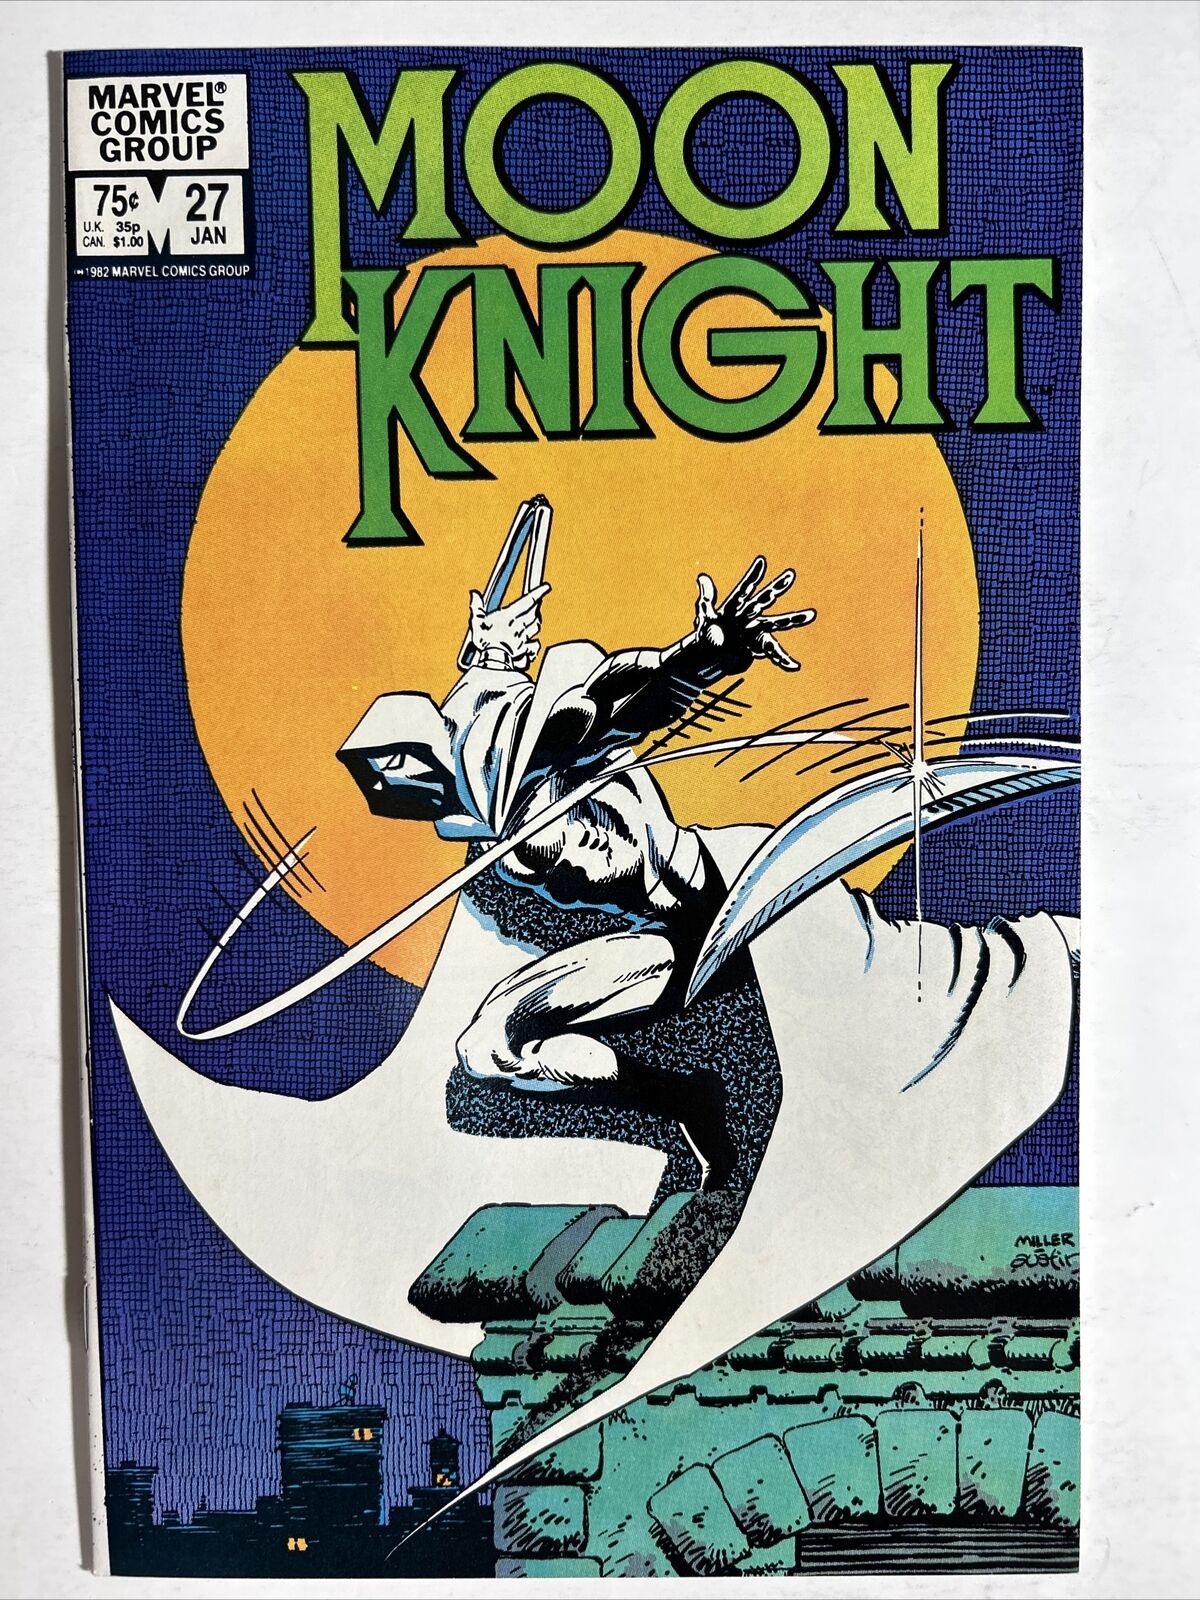 MOON KNIGHT #27 - JANUARY 1983 Frank Miller Cover BRONZE AGE MARVEL COMICS